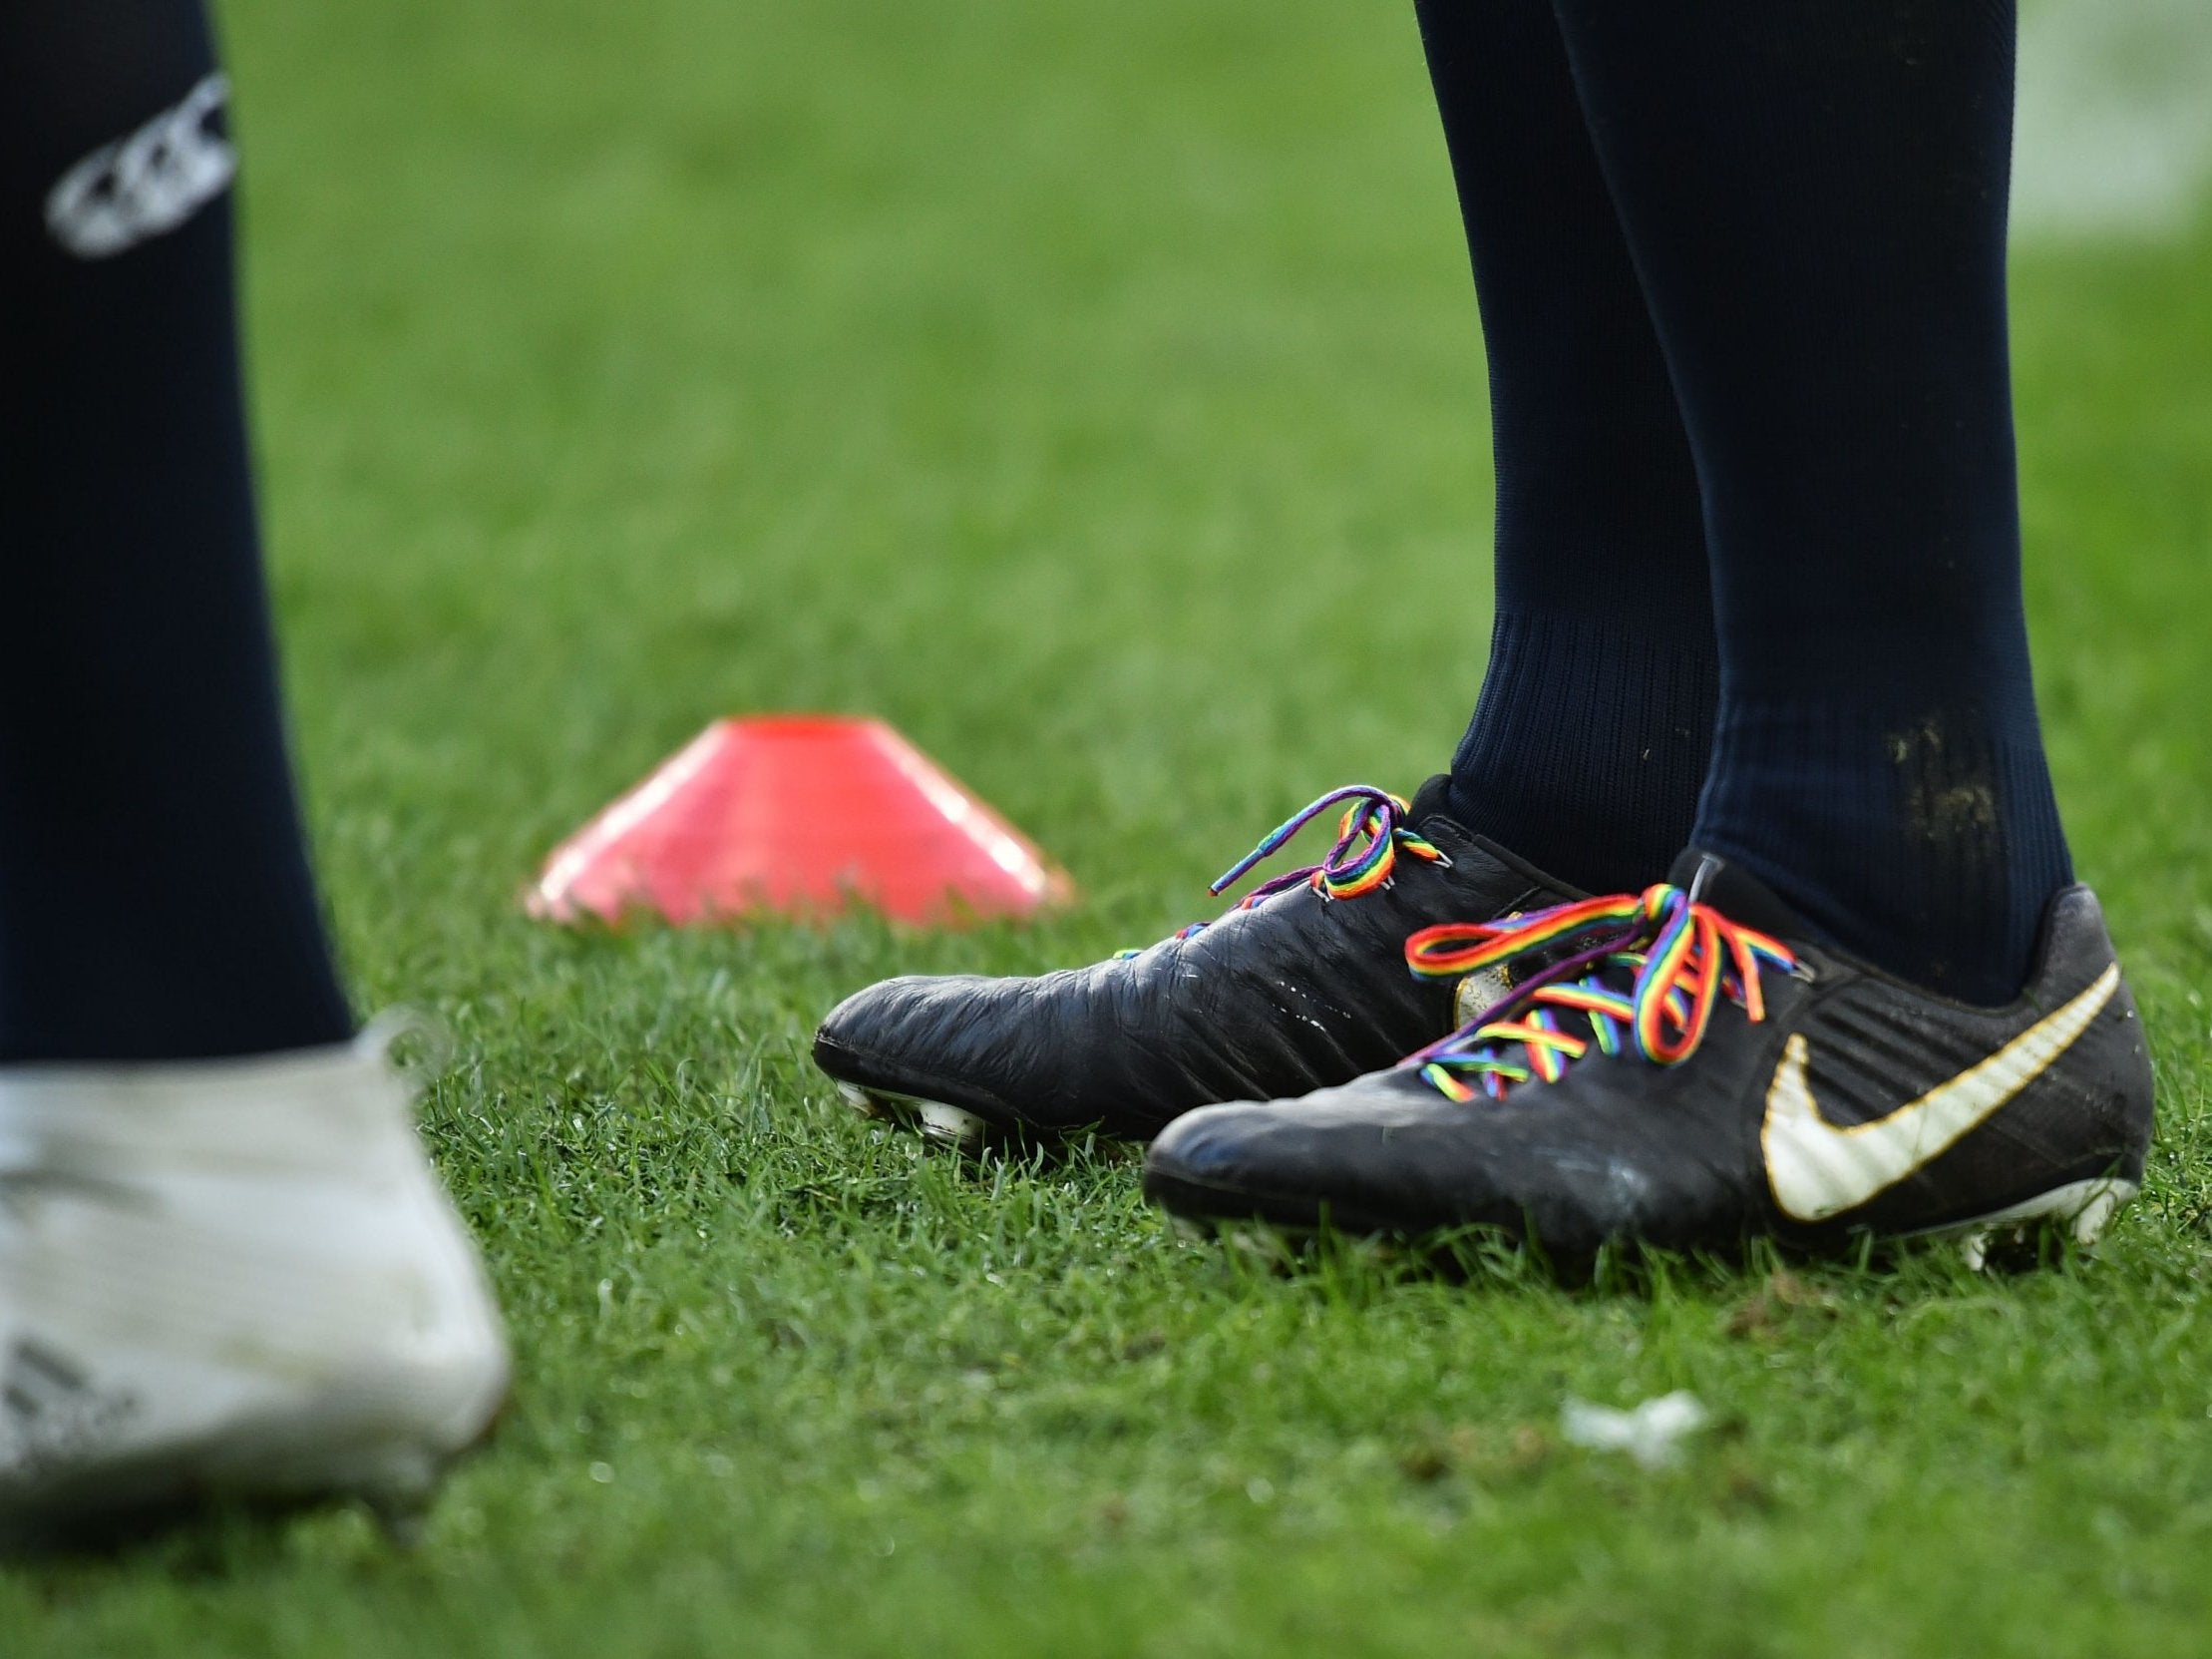 A number of international teams have invited players to wear Rainbow Laces this weekend